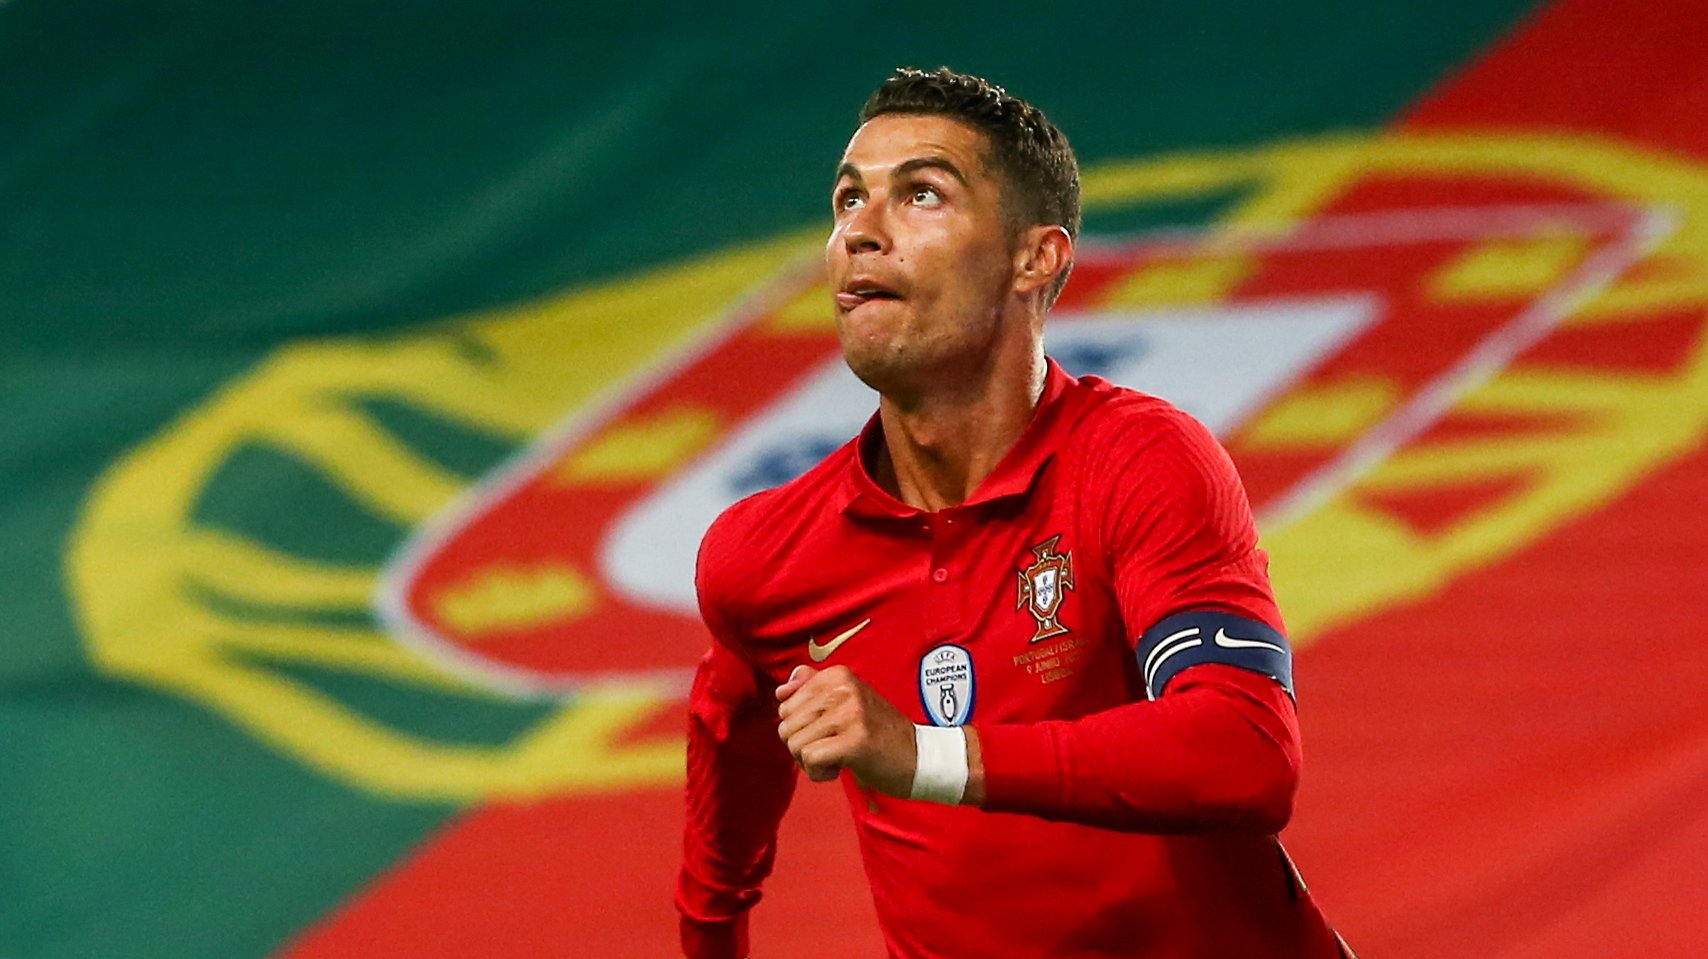 Portugal&#039;s Cristiano Ronaldo in action during their friendly match against Israel in preparation for the upcoming UEFA EURO 2020, at Alvalade Stadium in Lisbon, Portugal, 09 June 2021. JOSE SENA GOULAO/LUSA